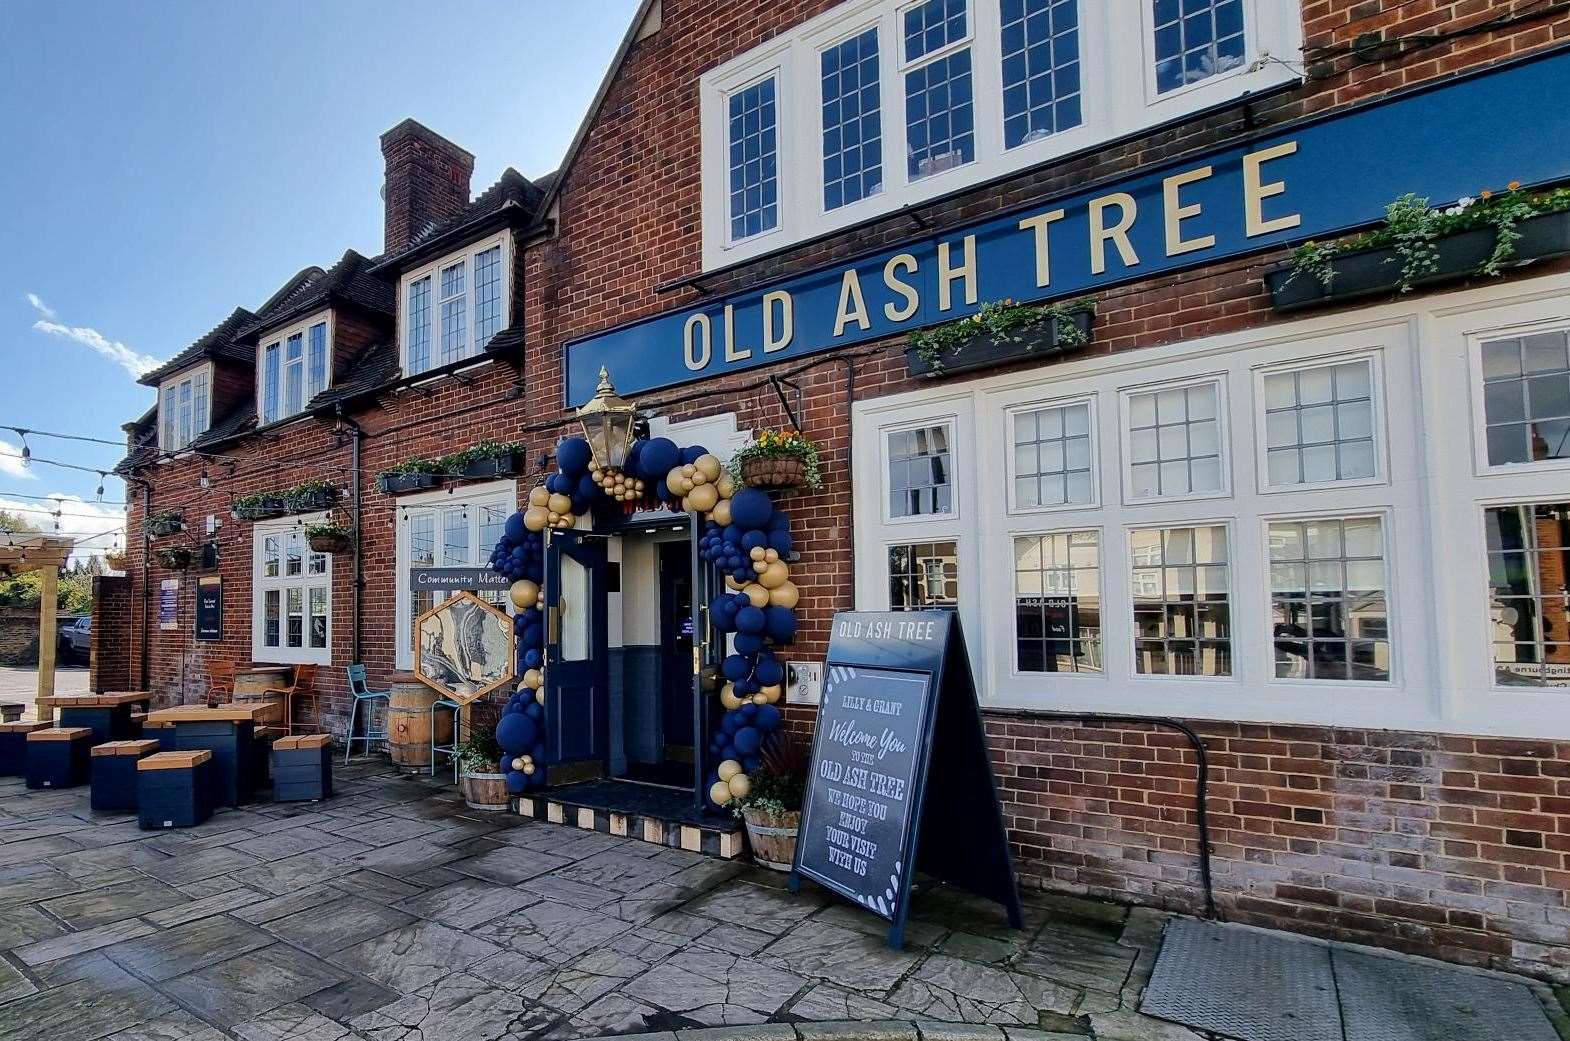 The pub has reopened after a £360,000 revamp. Picture: Grant Sanders